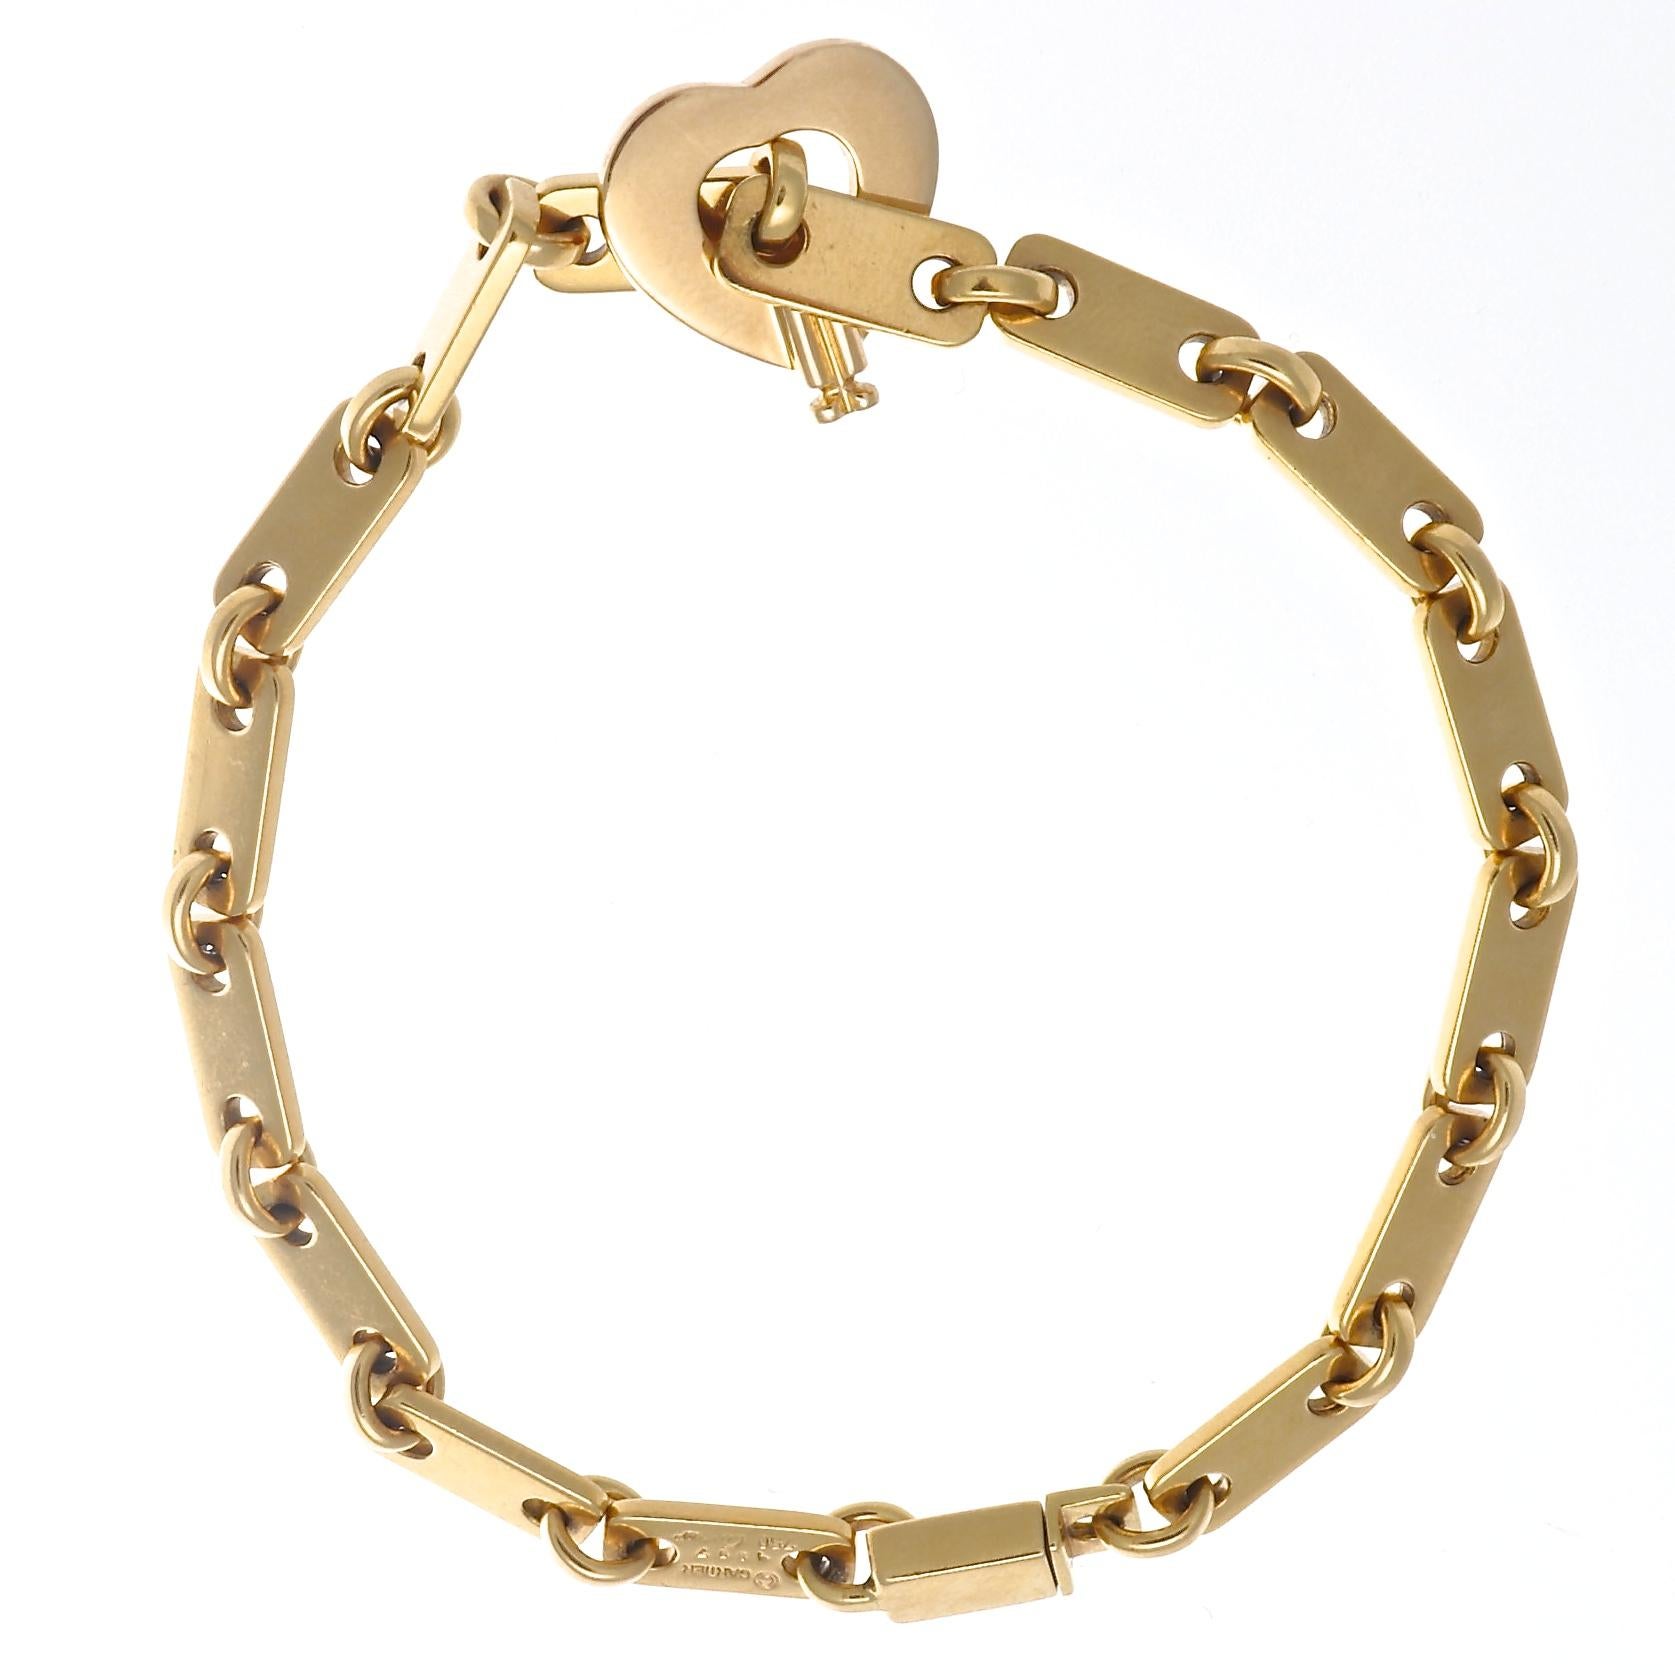 The perfect 18k gold link bracelet with a beautiful open heart clasp, from Cartier France. Circa 1997, and measures 7 1/4 inches long. Signed Cartier and includes serial numbers. Add to your wrist stack or wear it alone, but wear it everyday to keep